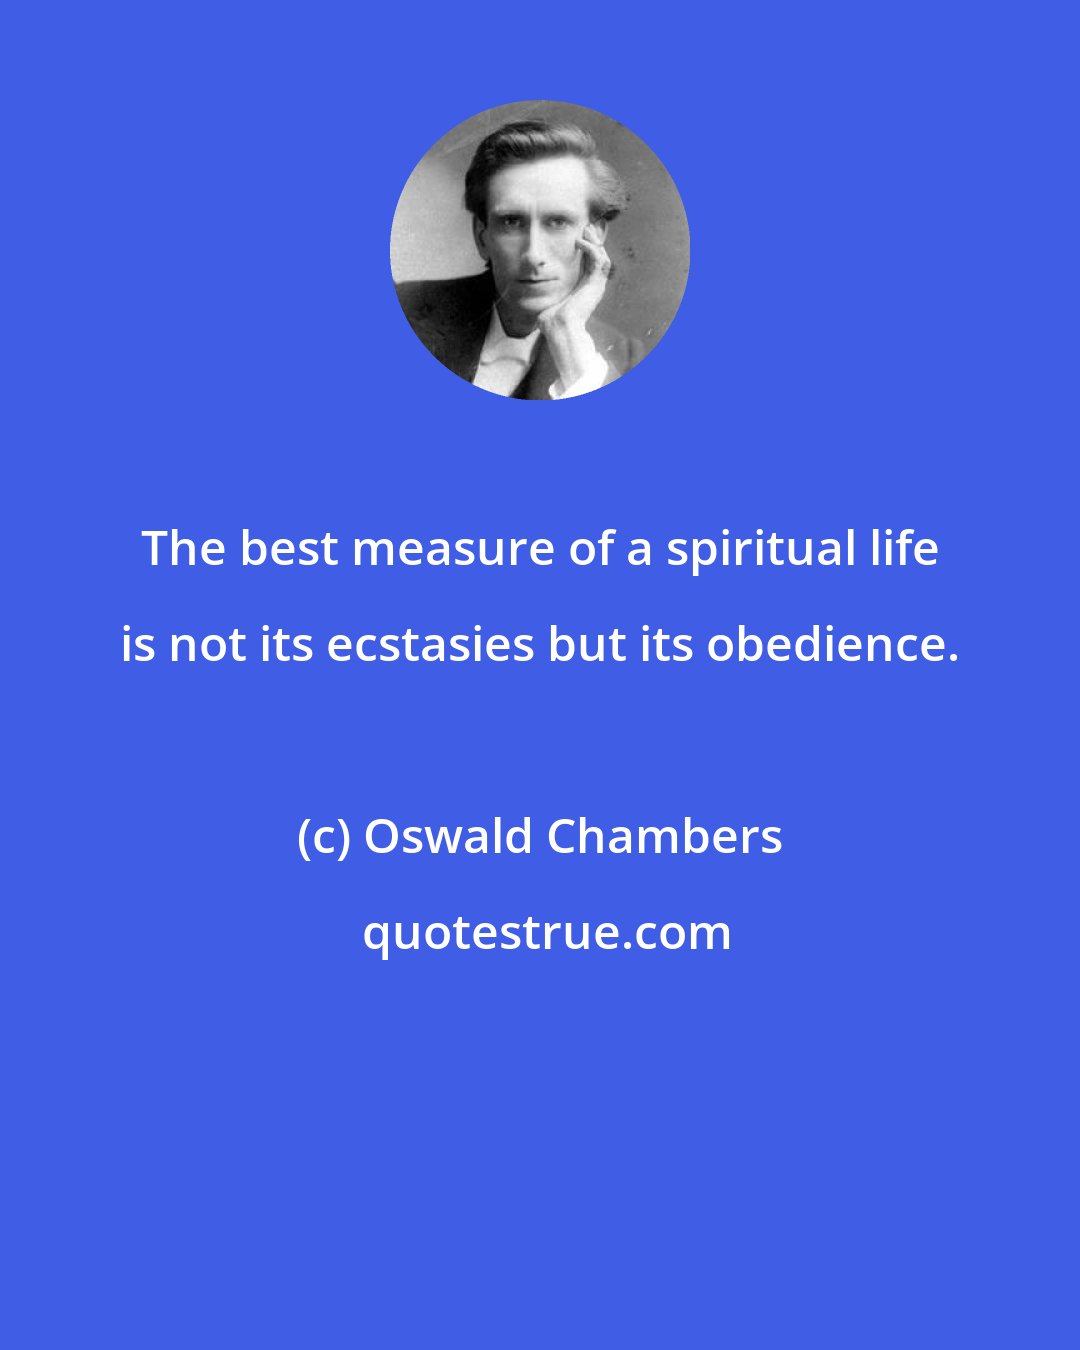 Oswald Chambers: The best measure of a spiritual life is not its ecstasies but its obedience.